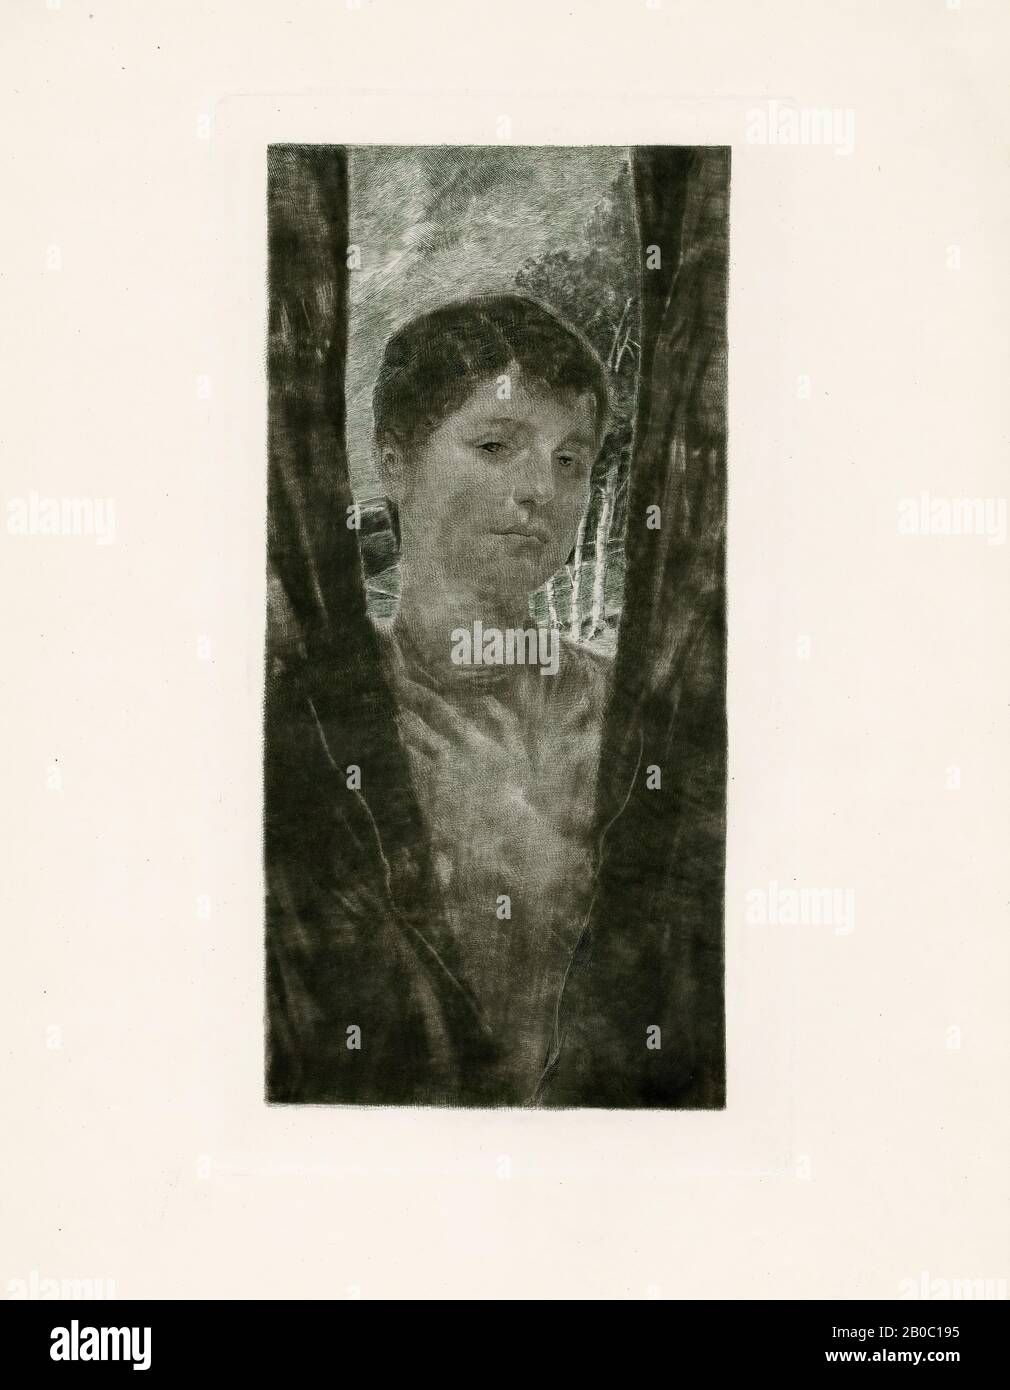 Max Klinger, Erinnerung, n.d., etching and mezzotint on paper, 9 3/4 in. x 4 5/8 in. (24.76 cm. x 11.75 cm.) Stock Photo